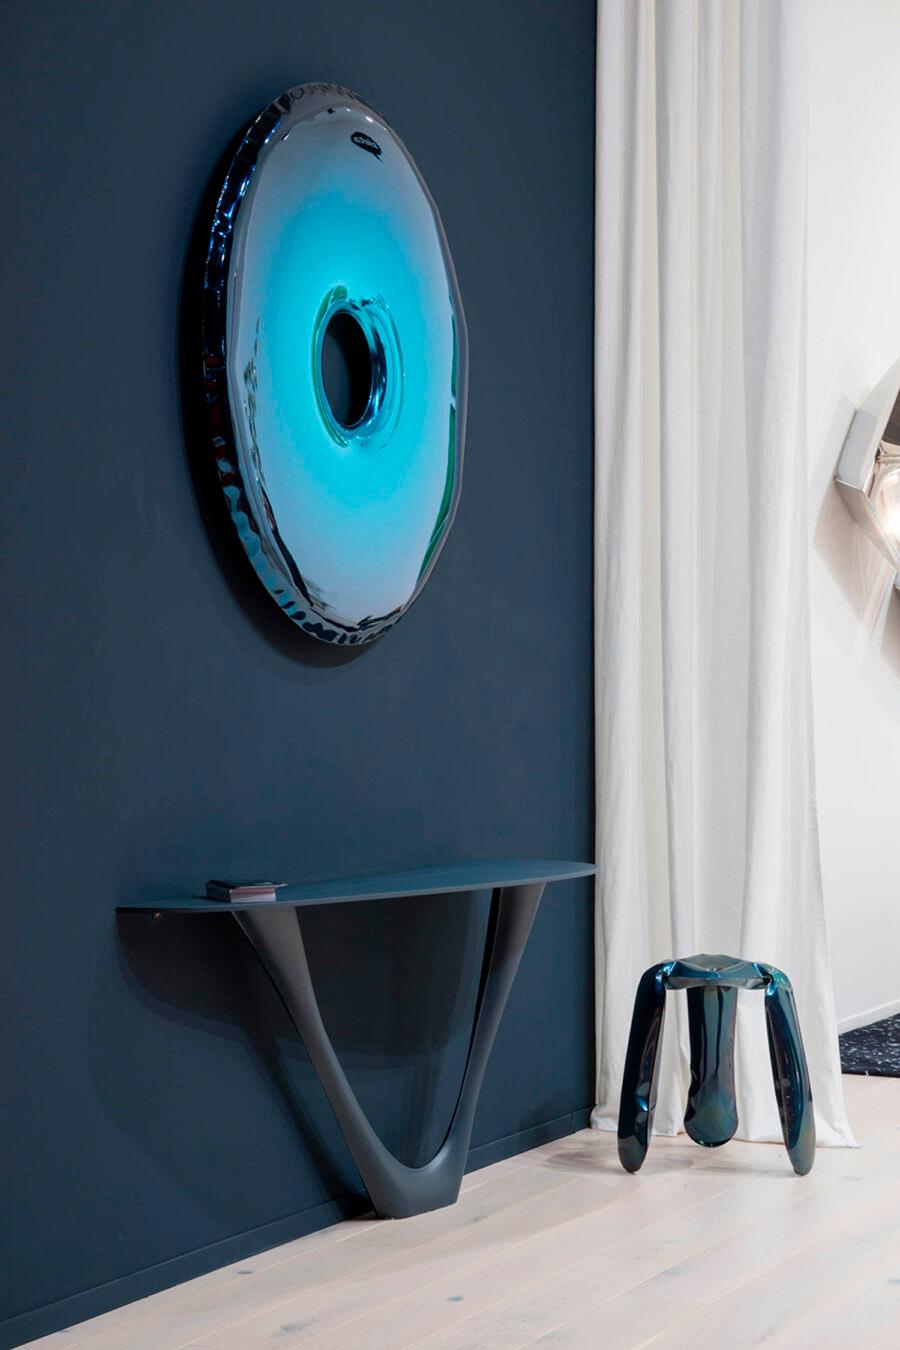 Rondo mirror 'Deep Space Blue' by Zieta Prozessdesign
Gradient collection - Deep Space blue

Stainless steel
Measures: 120 x 6 cm.

Several sizes available: 
Diameter: 75 cm / 120 cm / 150 cm



Zieta is best known for his collection of